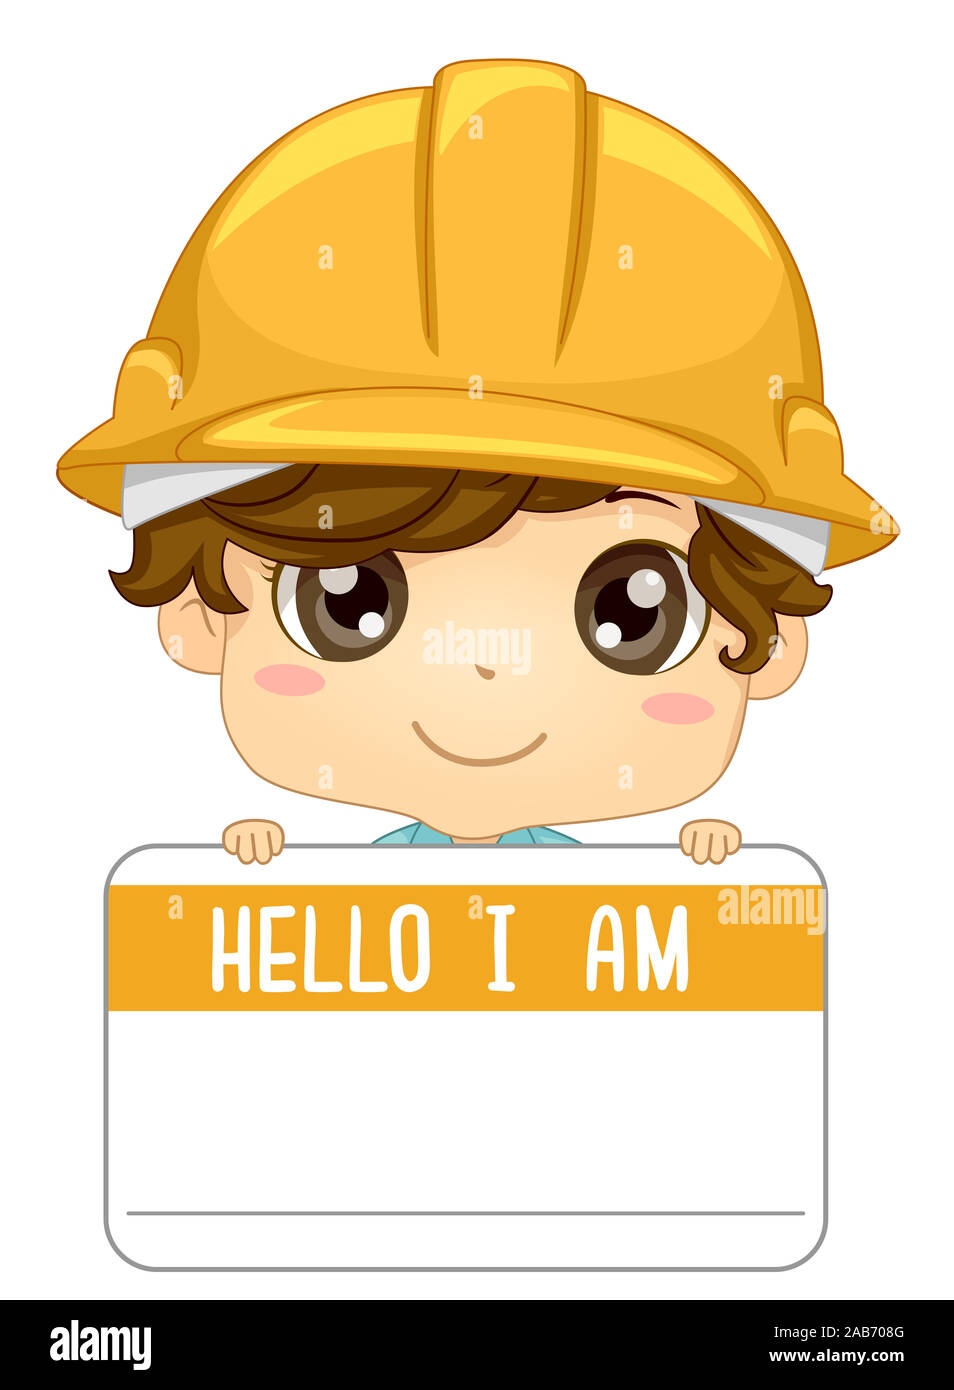 Illustration of a Kid Boy Wearing a Yellow Construction Hard Hat and  Holding a Hello I am Name Tag Stock Photo - Alamy